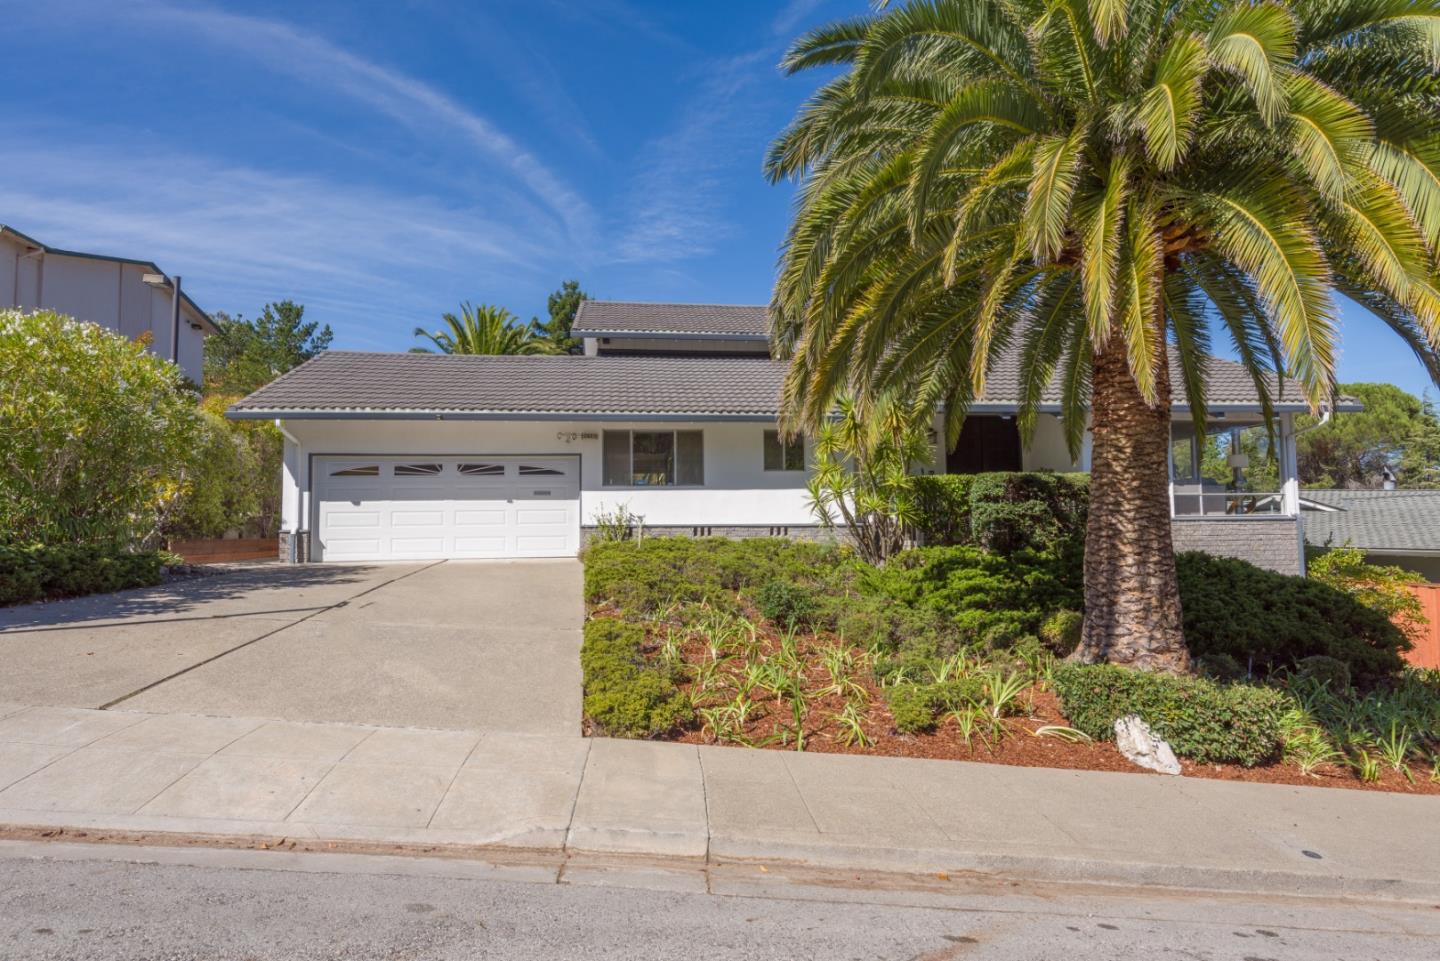 Photo of 2822 Trousdale Dr in Burlingame, CA